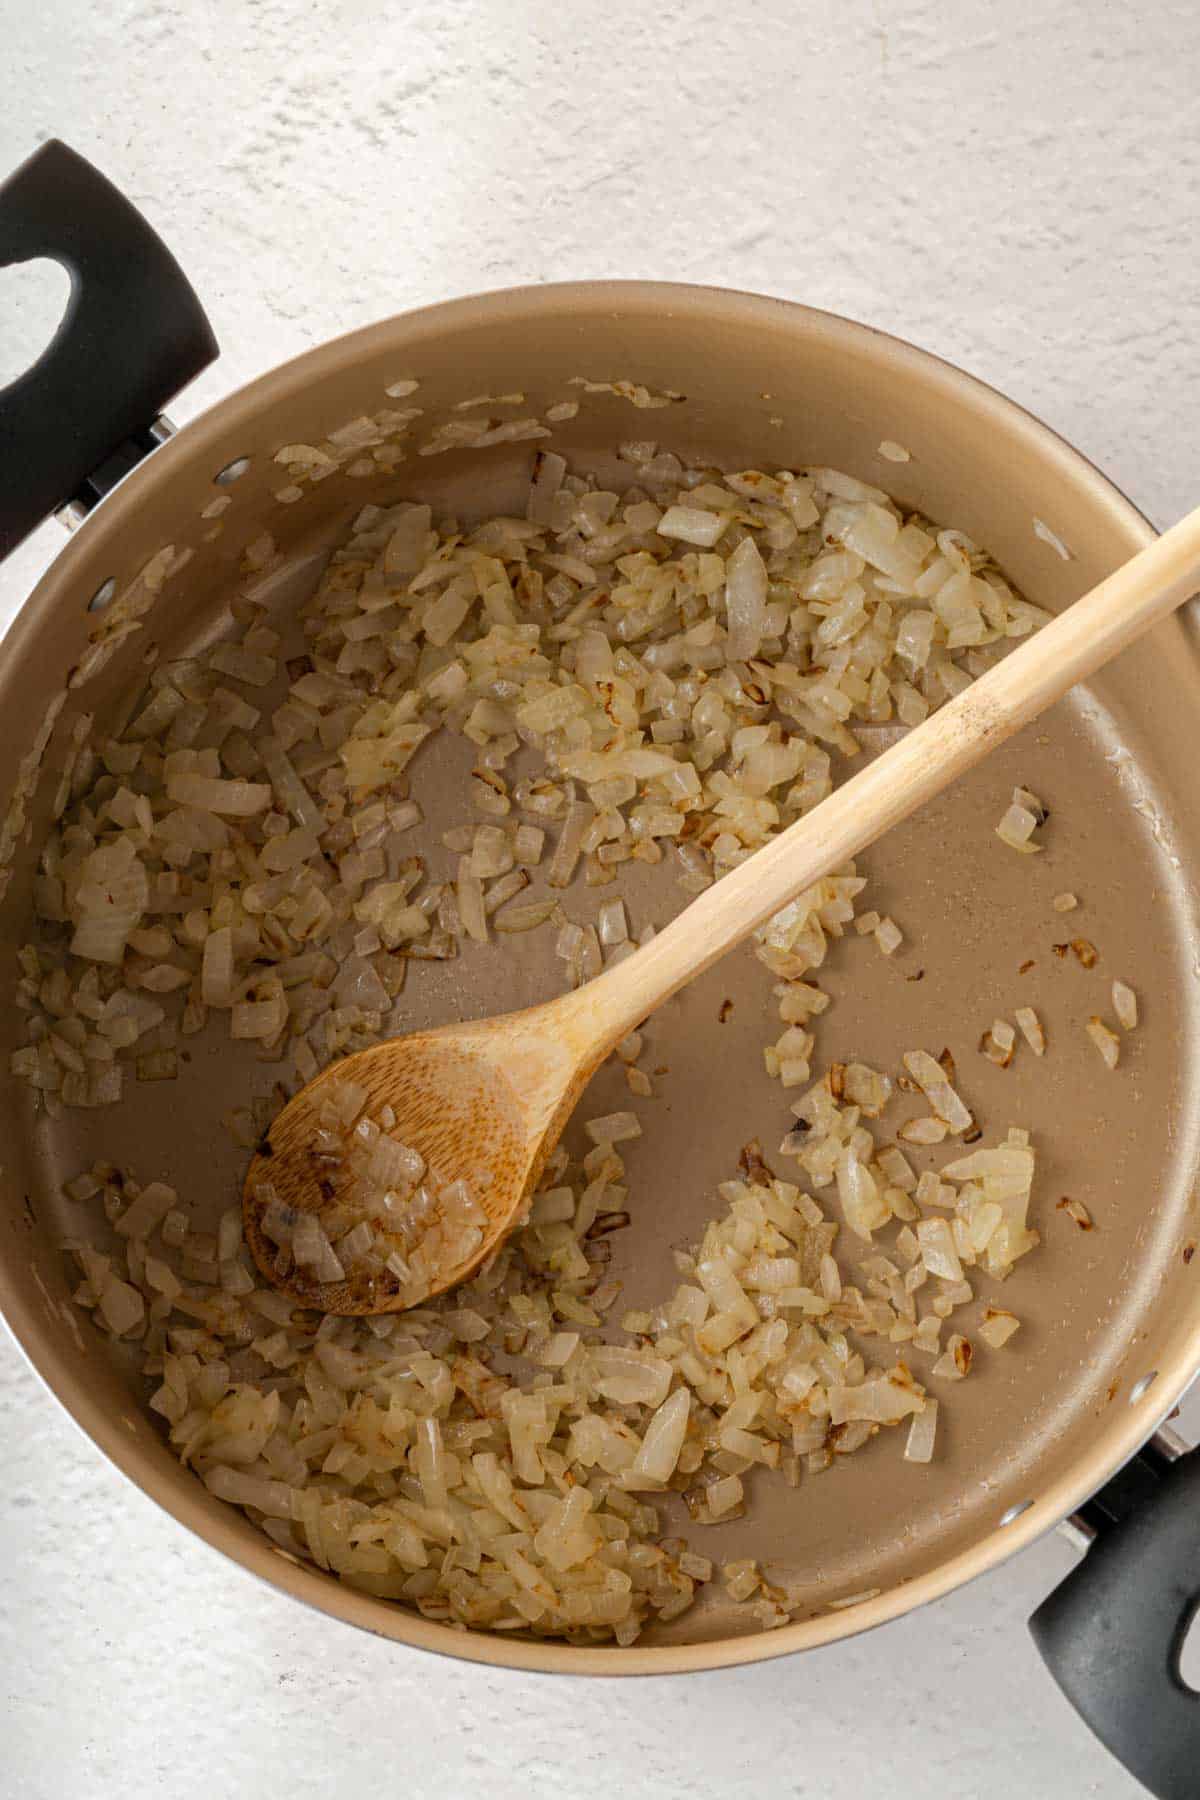 Sauteing onions in a pan with a wooden spoon.